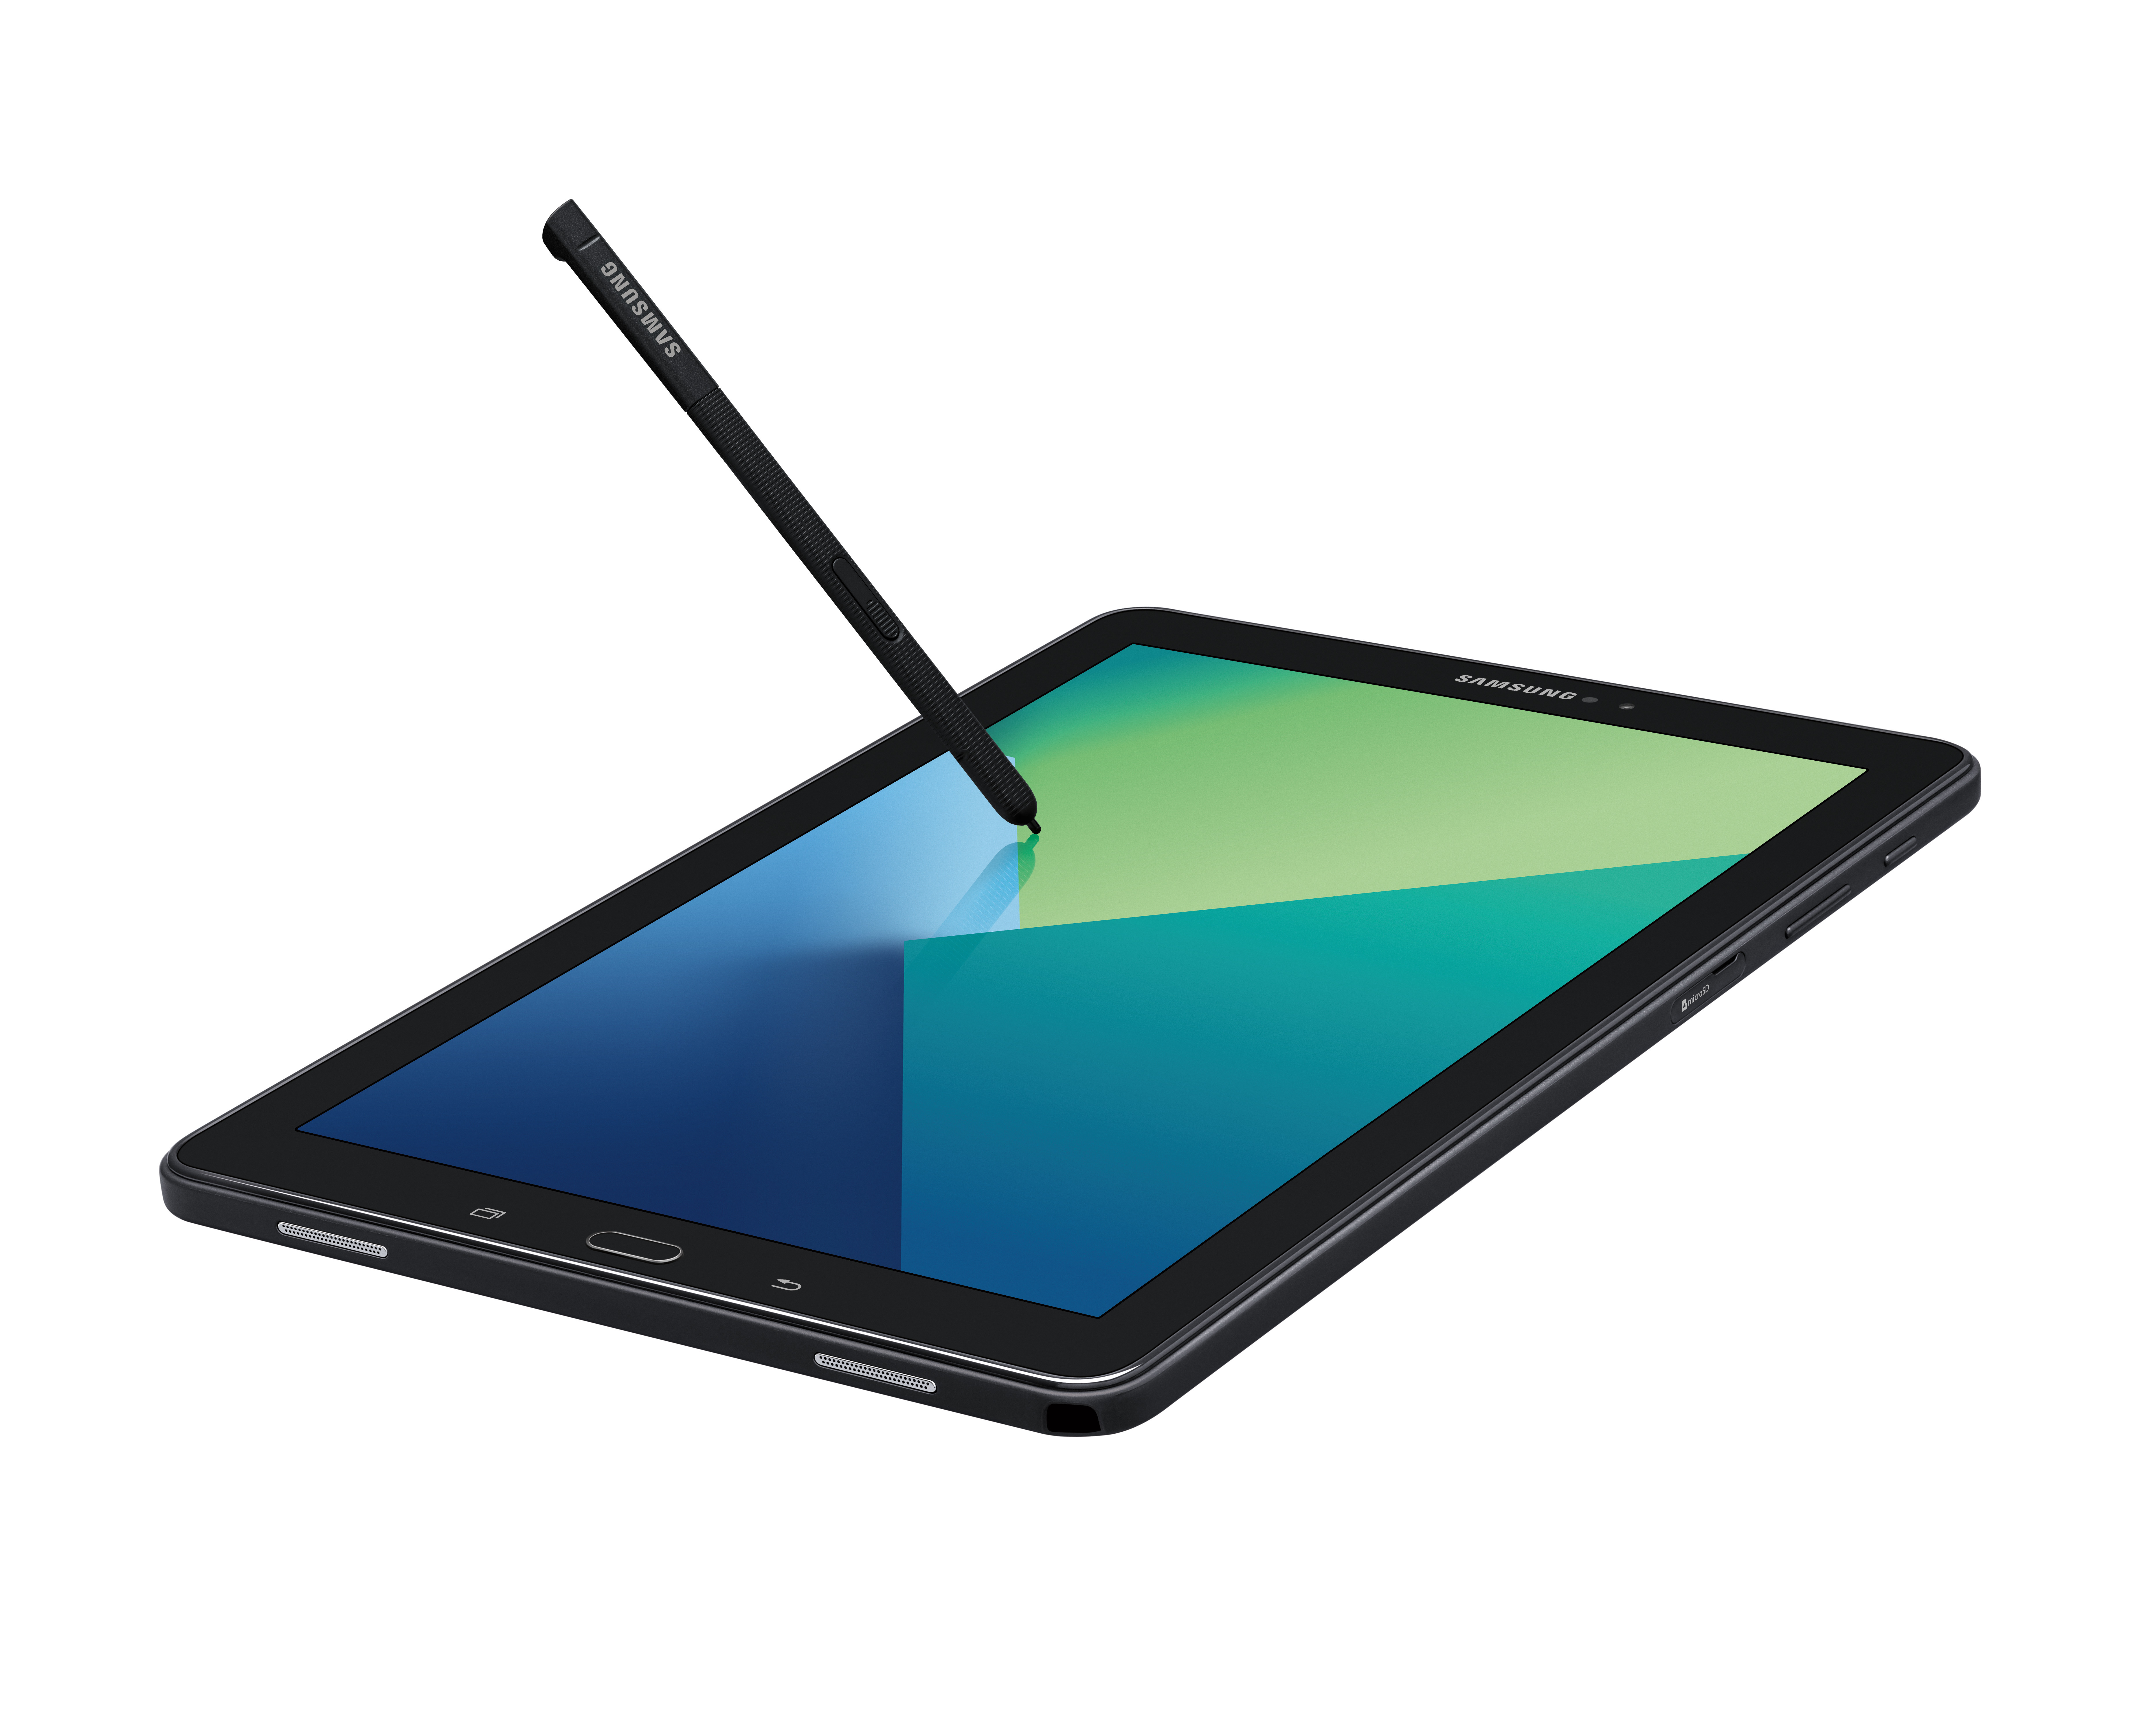 Samsung Galaxy Tab A 10.1” with S Pen Makes US Debut - Samsung US